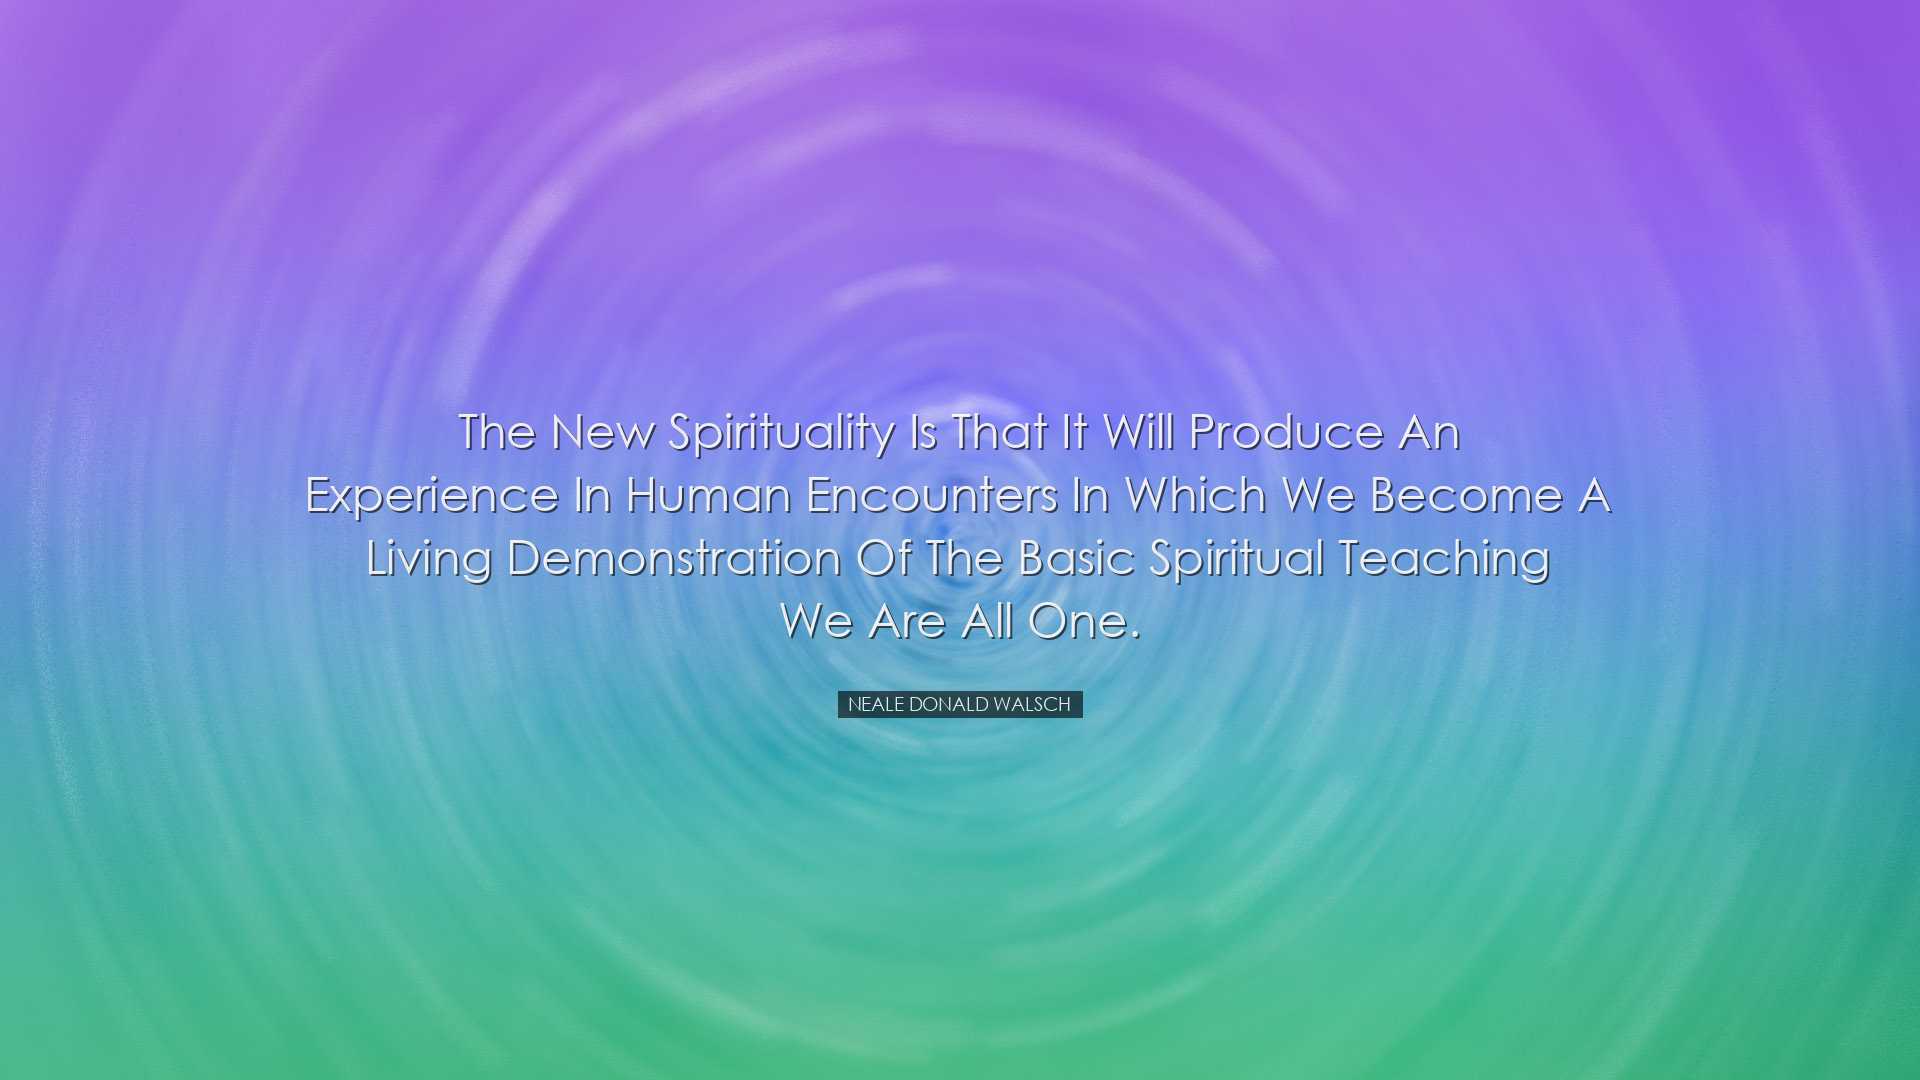 The new spirituality is that it will produce an experience in huma